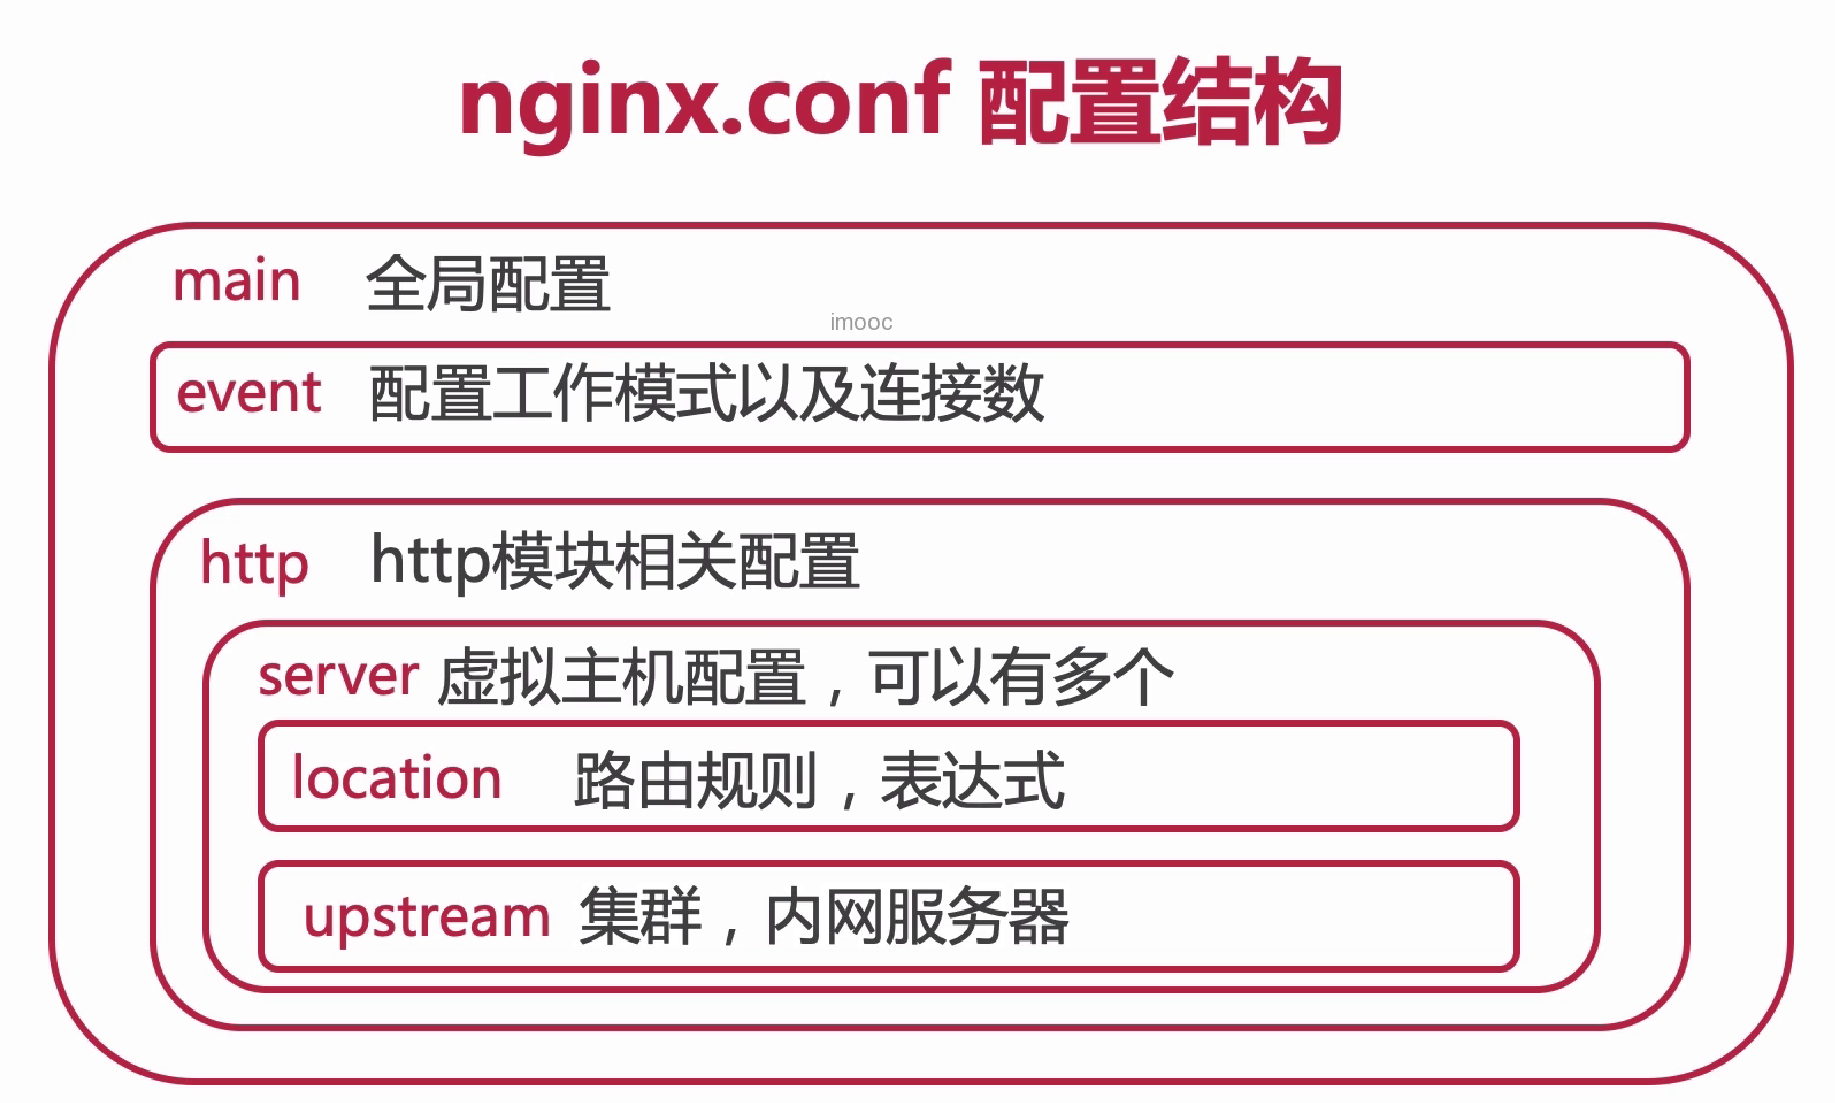 nginx<span style='color:red;'>配置</span><span style='color:red;'>文件</span><span style='color:red;'>和</span><span style='color:red;'>配置</span>命令详解<span style='color:red;'>案例</span>